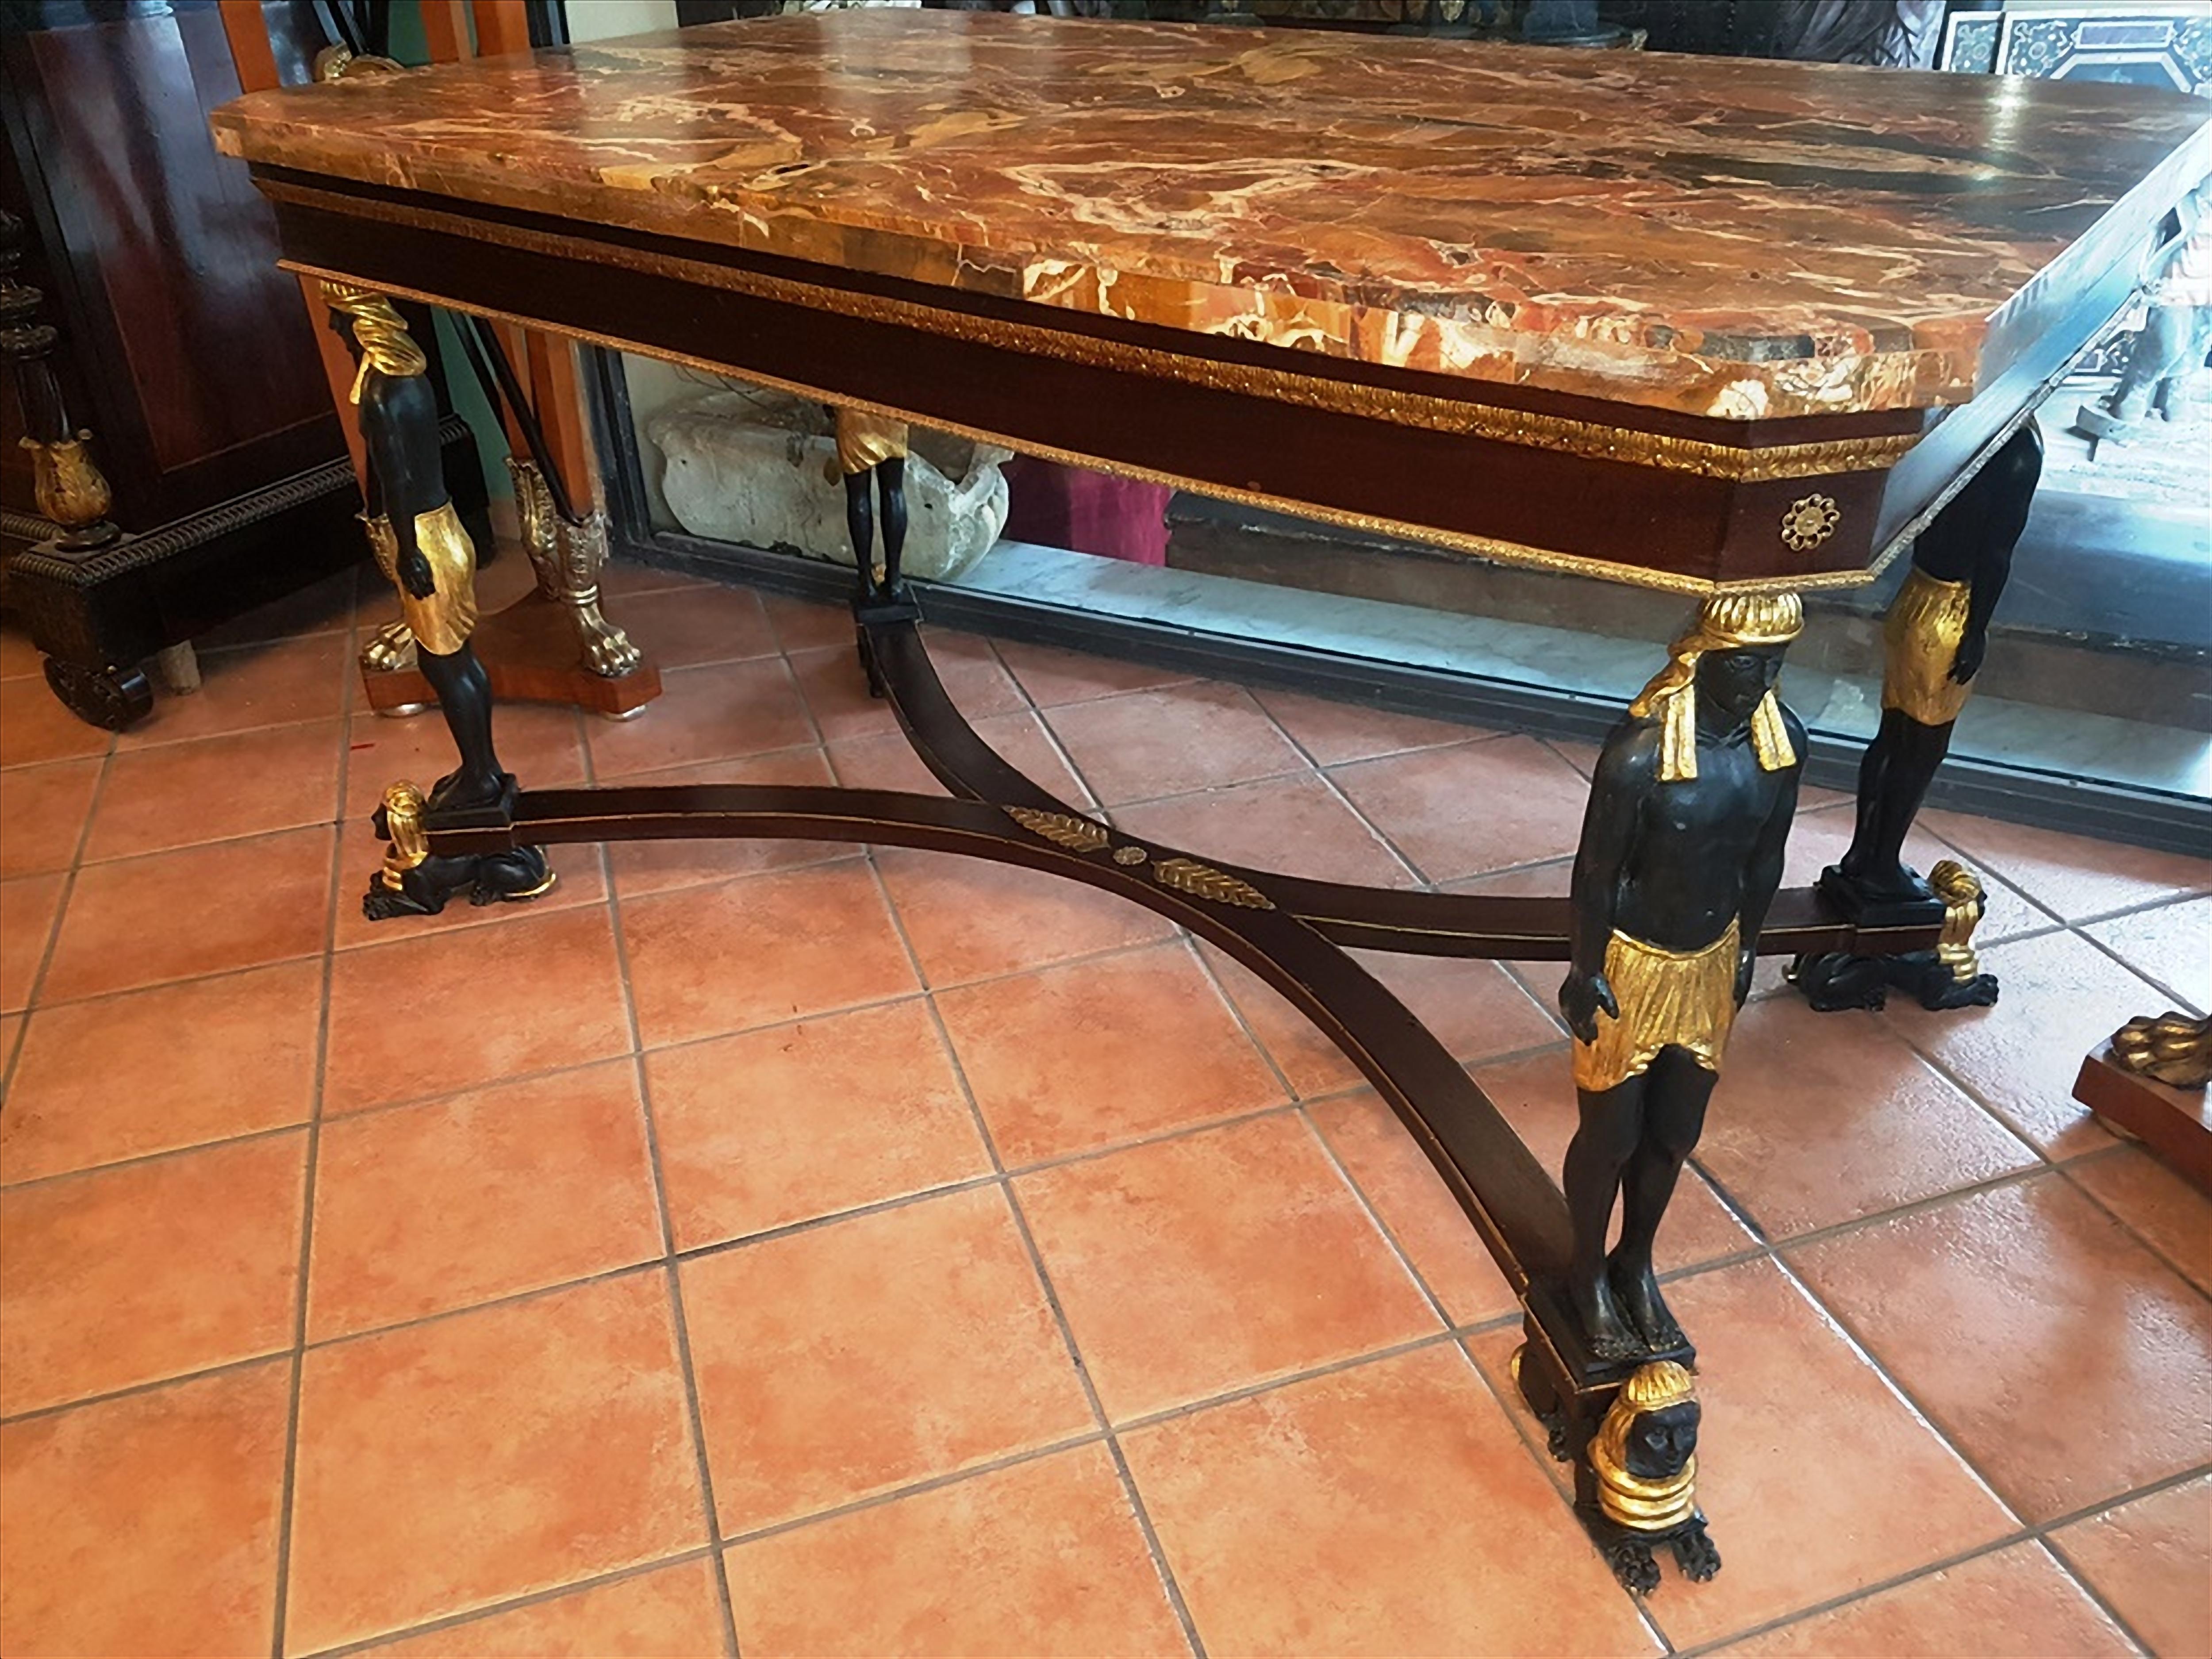 Important table veneered in mahogany, with applications in gilded bronze. Note the caryatids that support the upper floor, in carved and gilded ebony. Feet in the shape of a sphinx In the lower part.